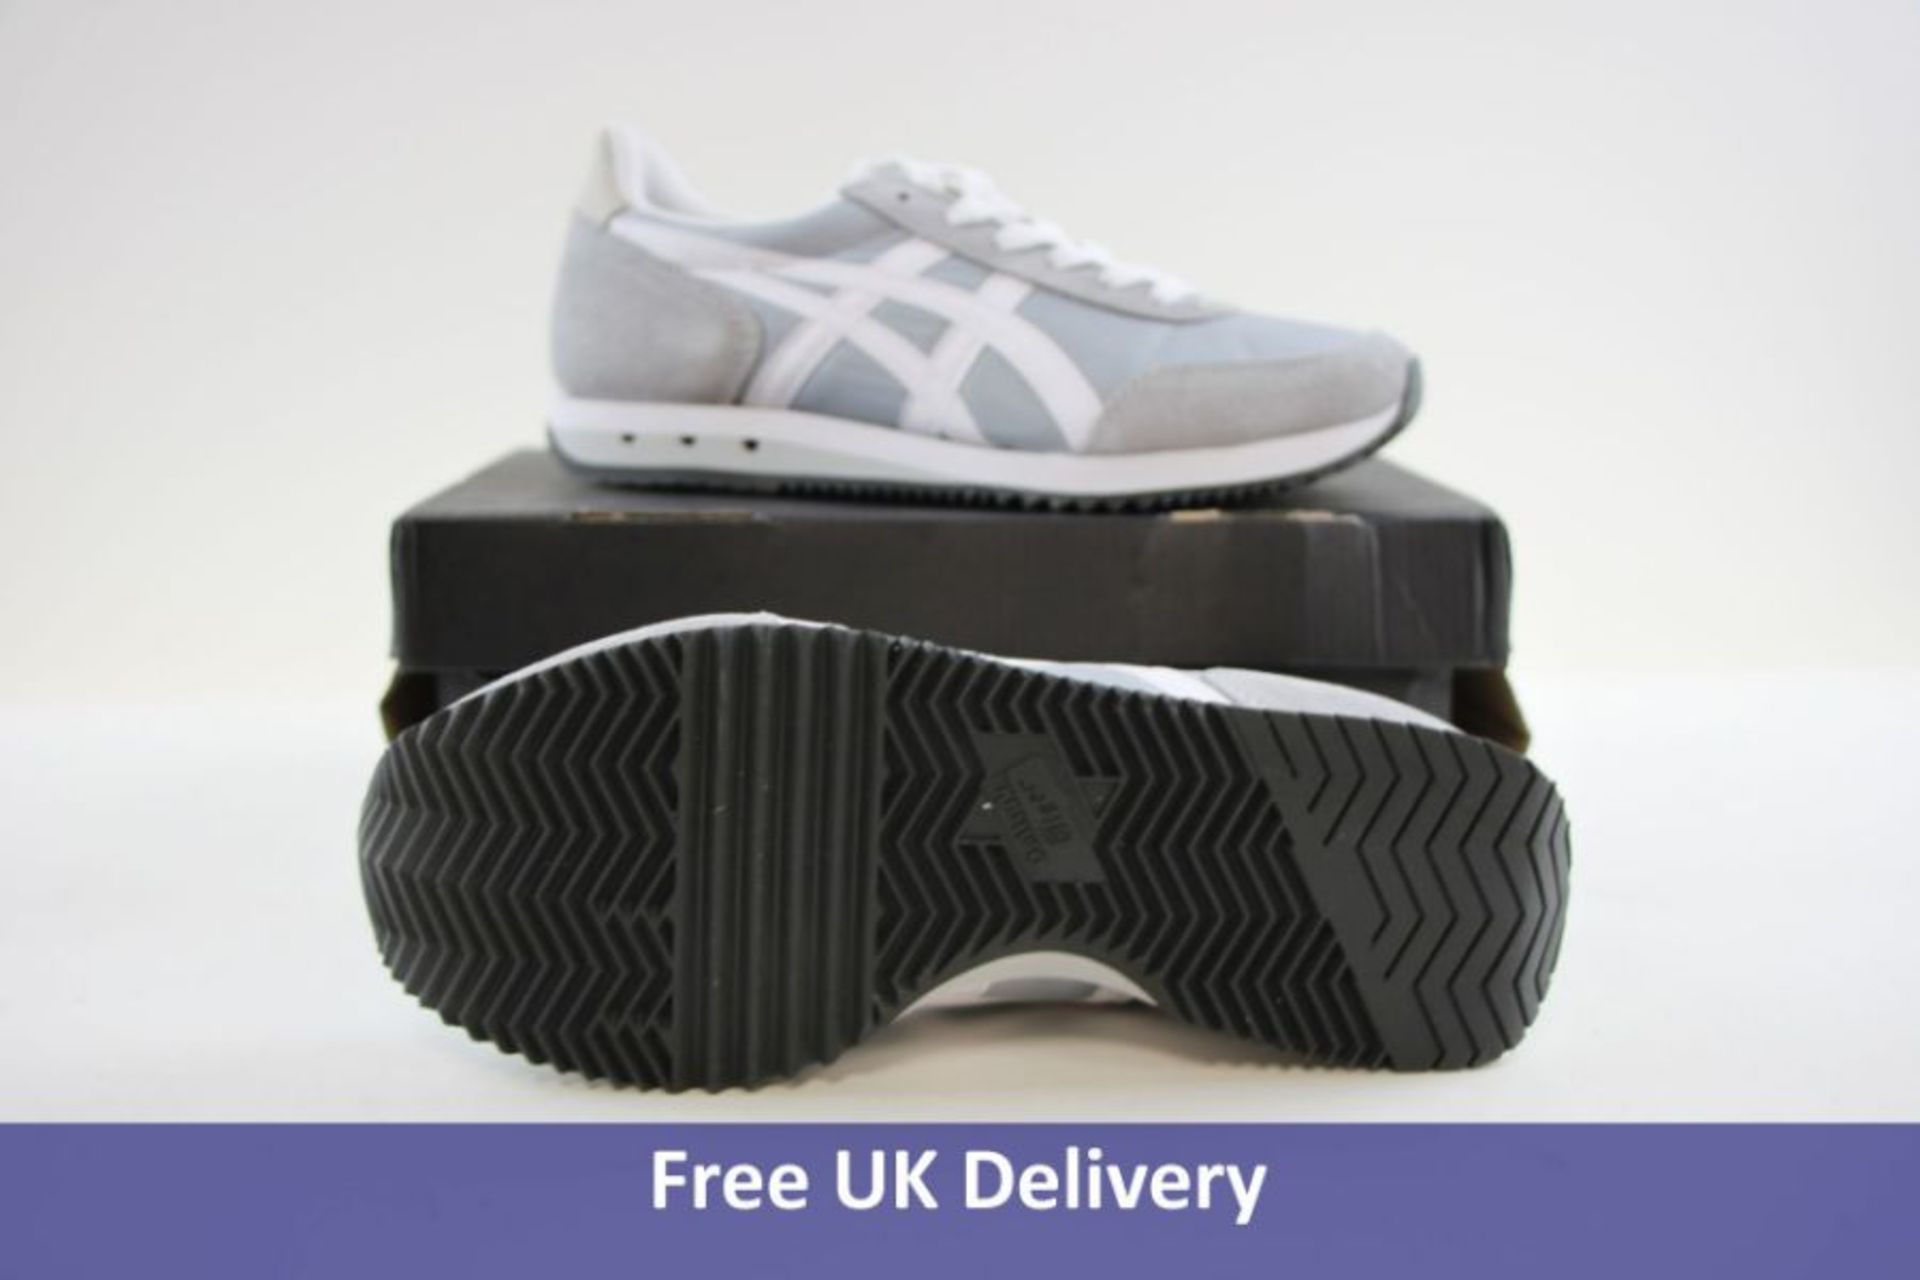 Onitsuka Tiger Unisex New York Trainers, Piedmont Grey and White, UK 6